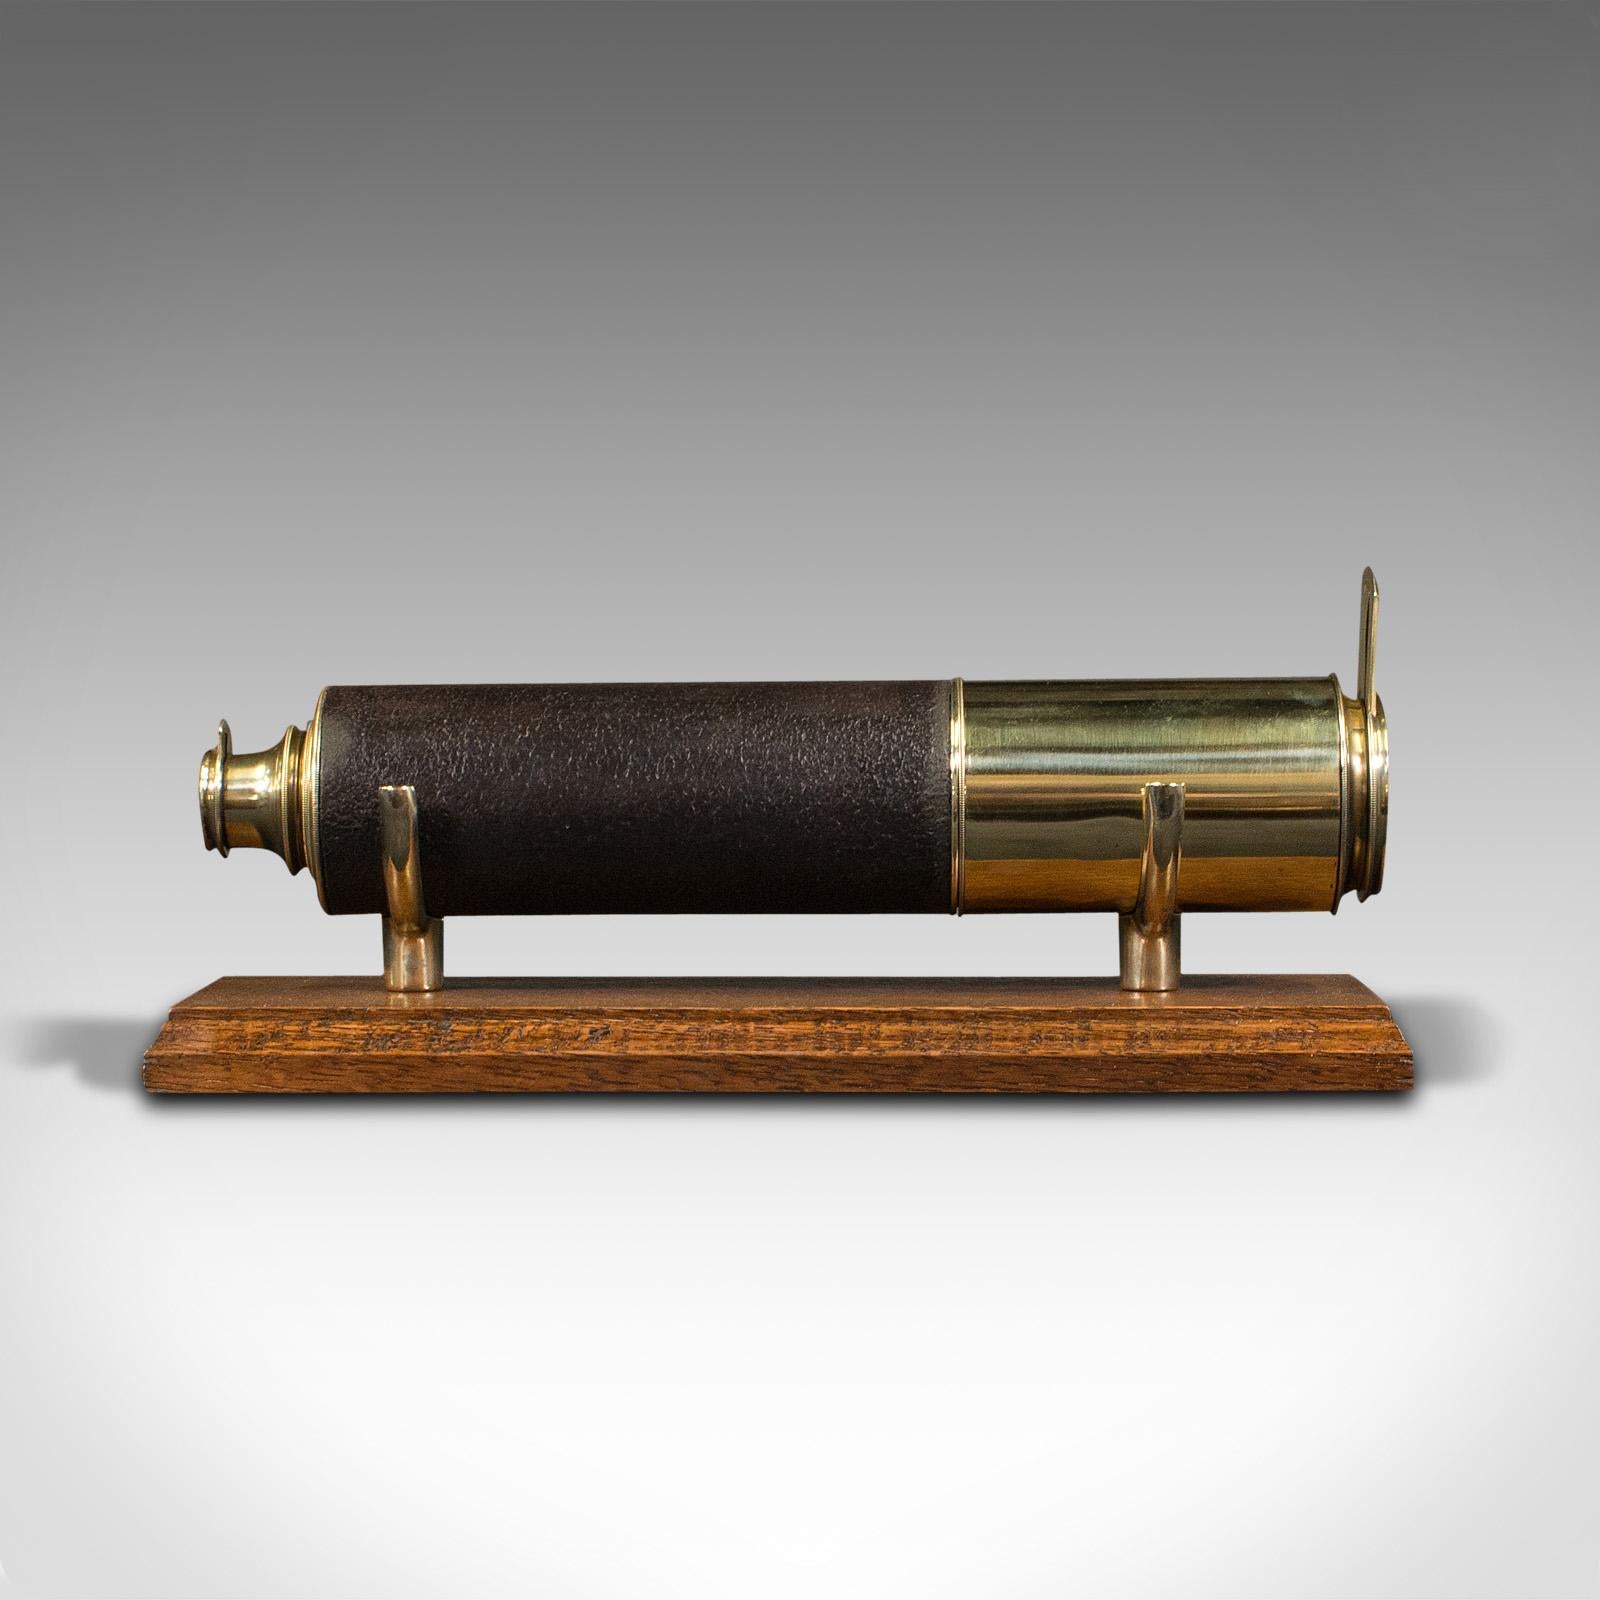 Antique 3 Draw Telescope, English, Brass, Leather, Terrestrial, Victorian, 1870 In Good Condition For Sale In Hele, Devon, GB